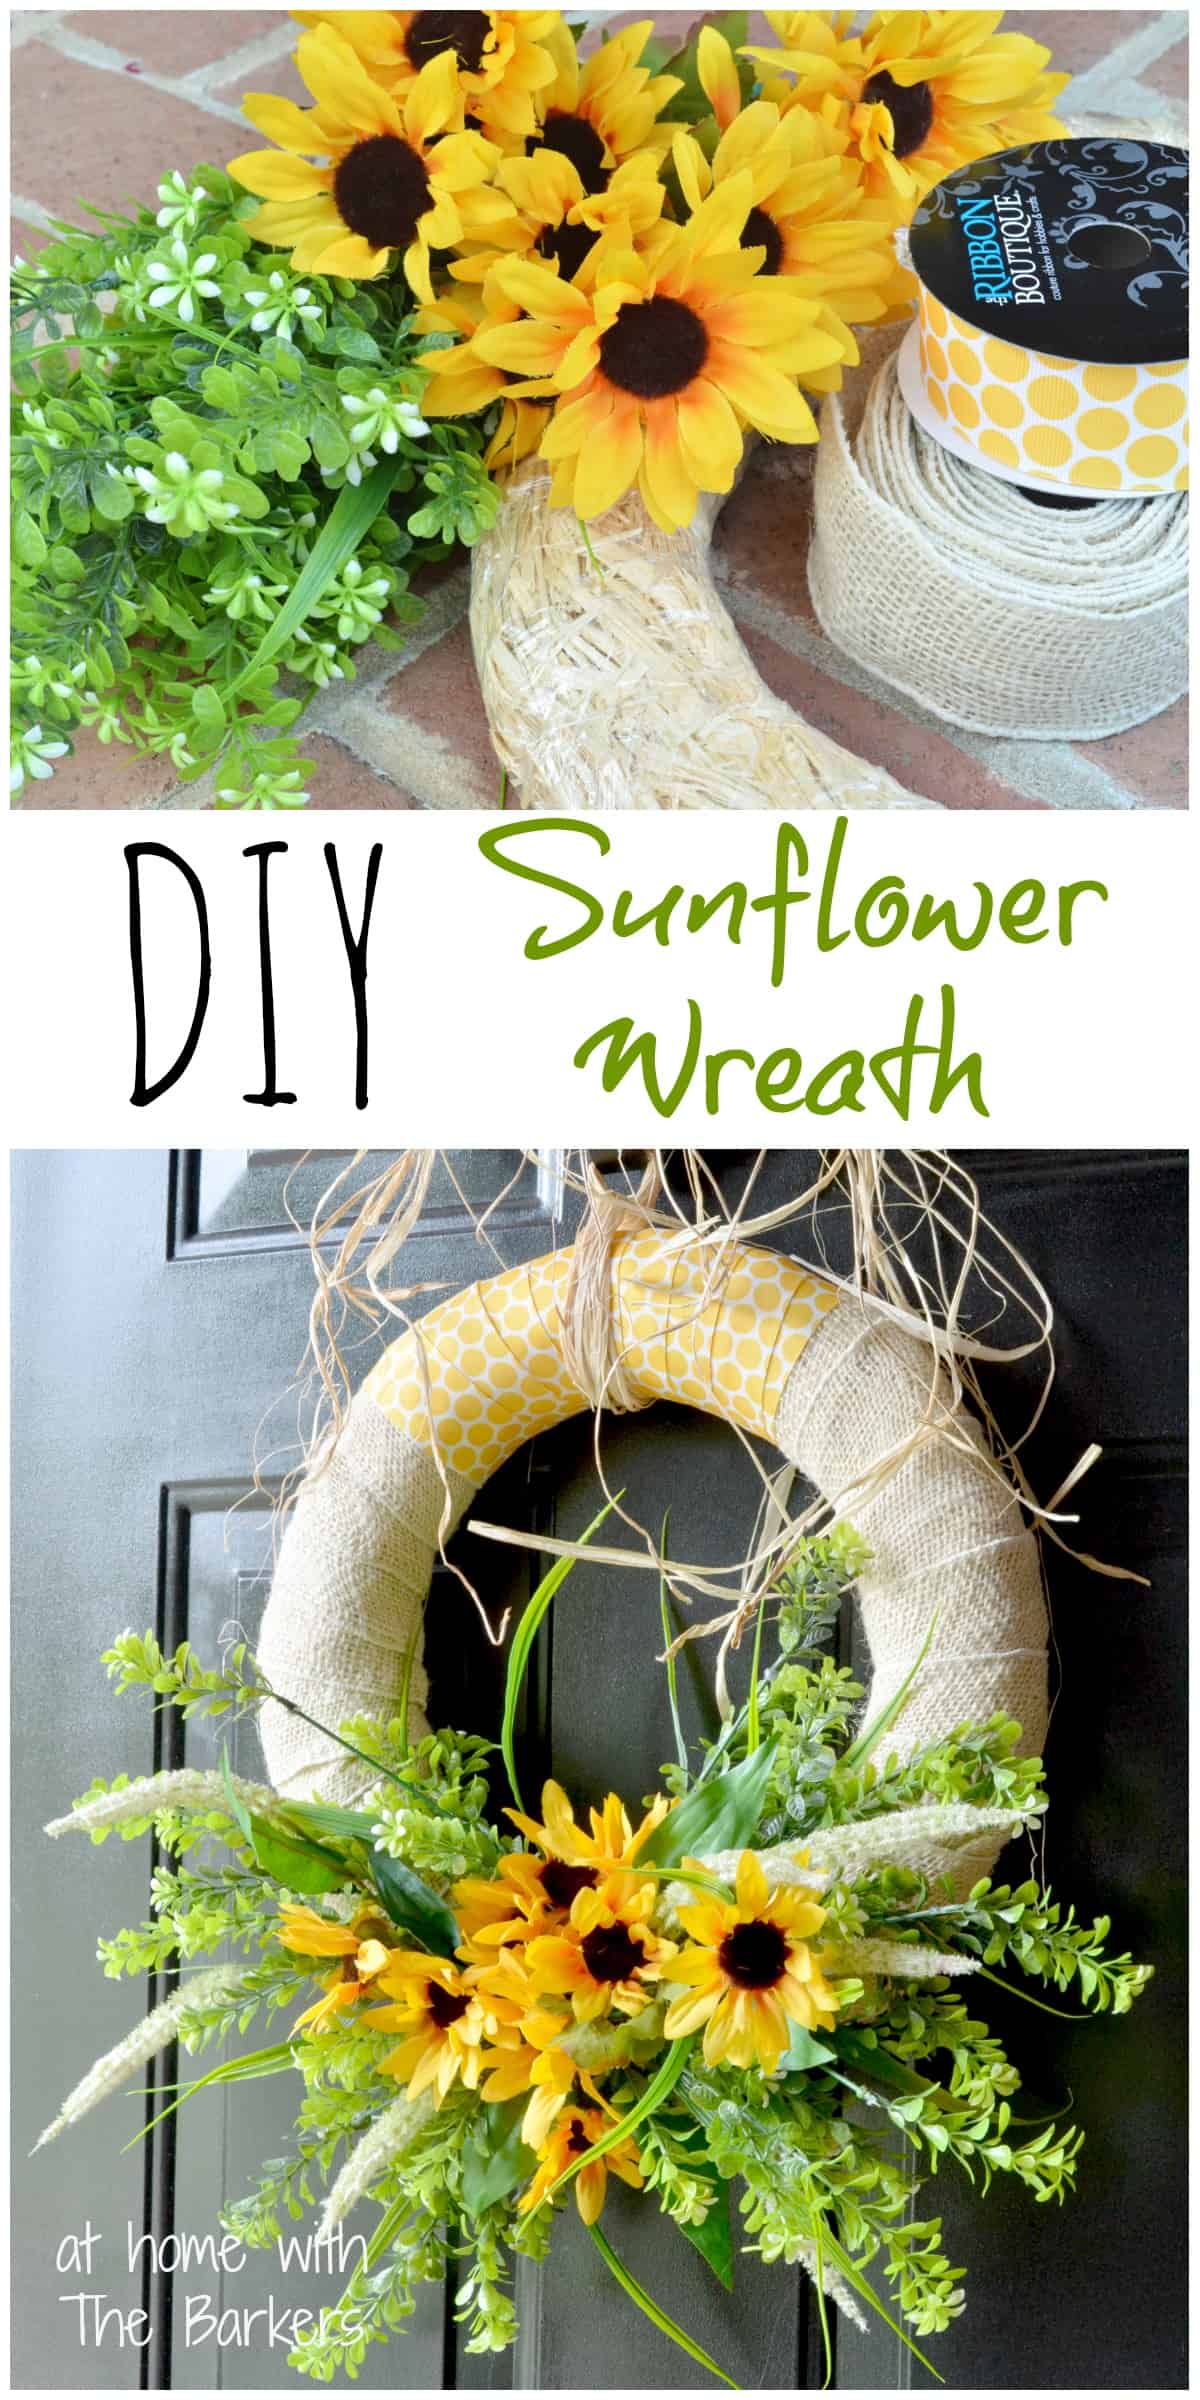 Summer Sunflower Wreath - At Home With The Barkers